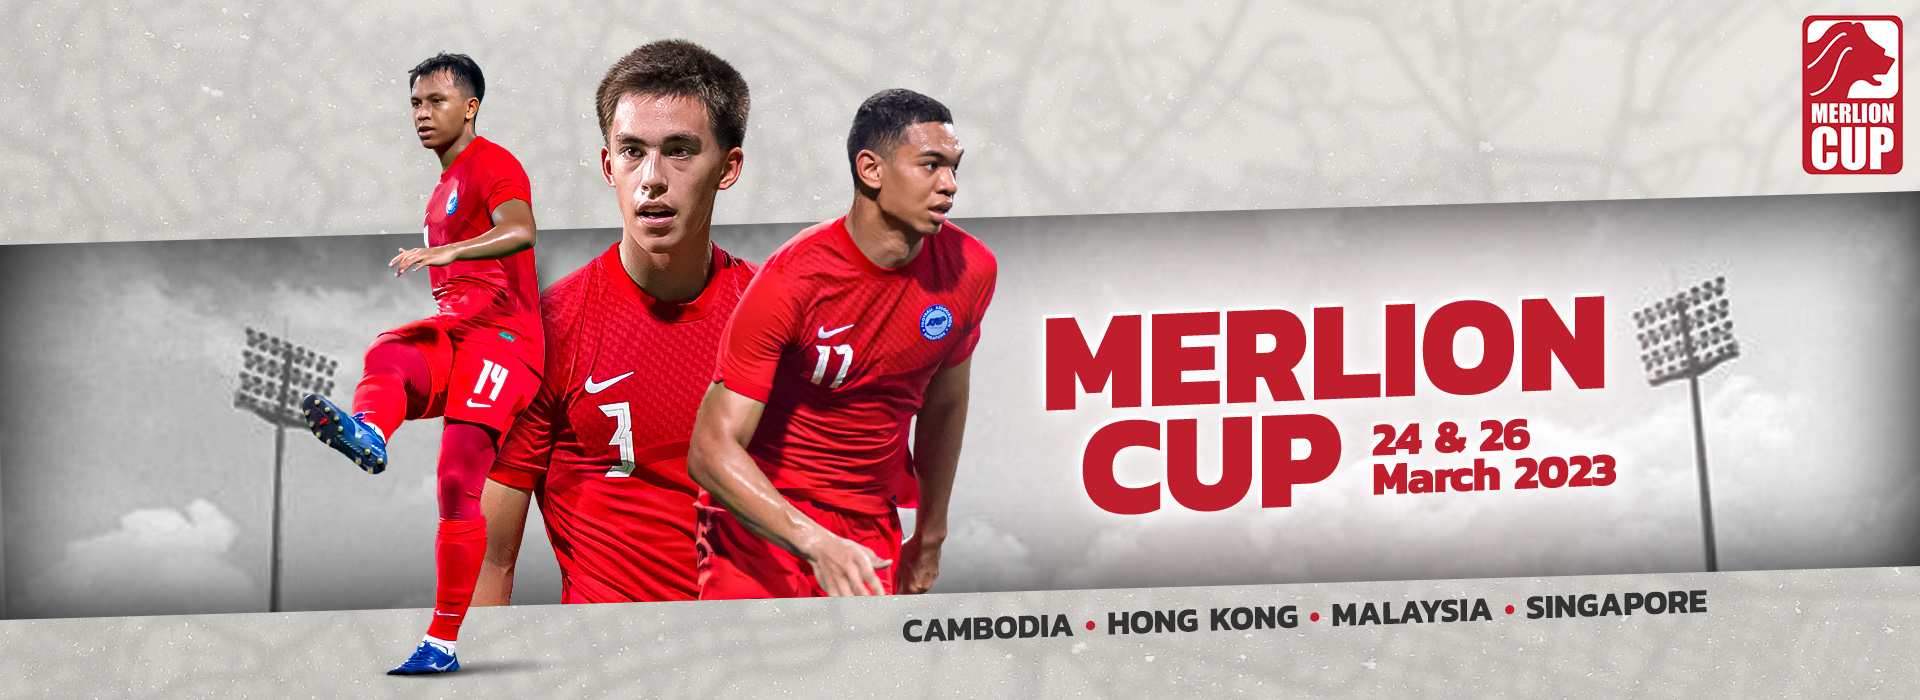 Merlion Cup 2023